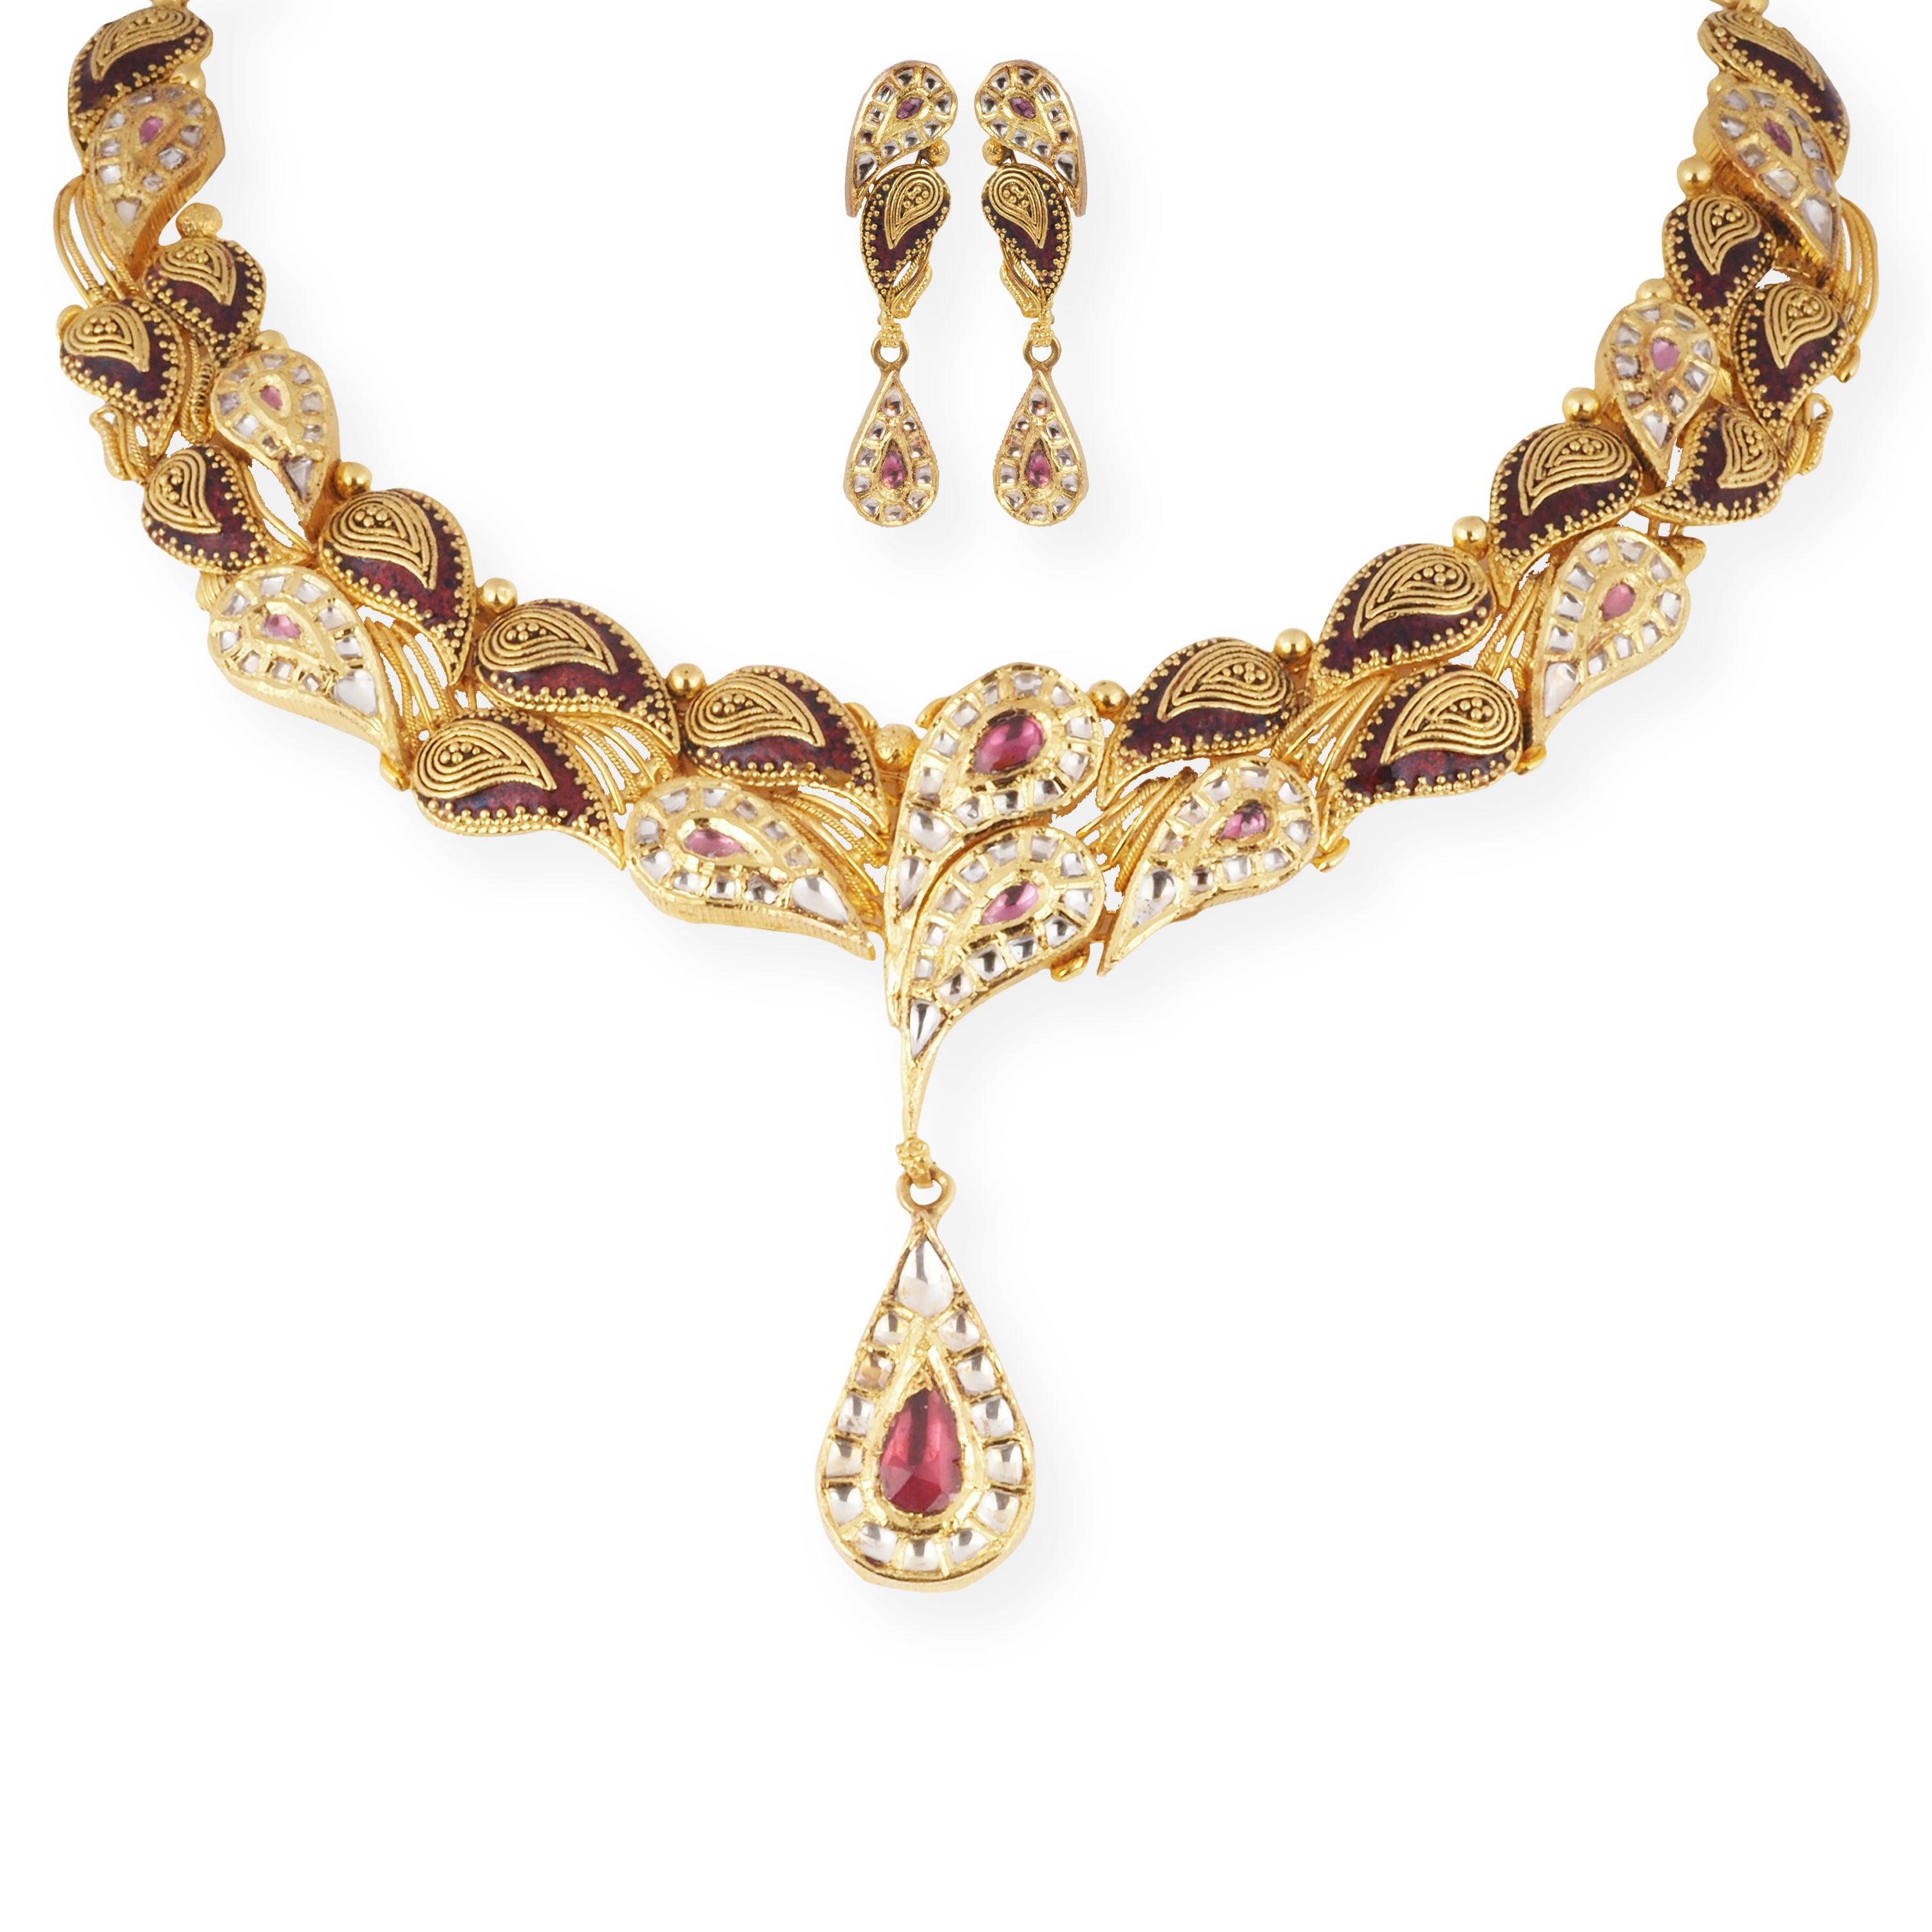 22ct Yellow Gold Antiquated Look Cubic Zirconia & Coloured Stones Necklace-5202 - Minar Jewellers